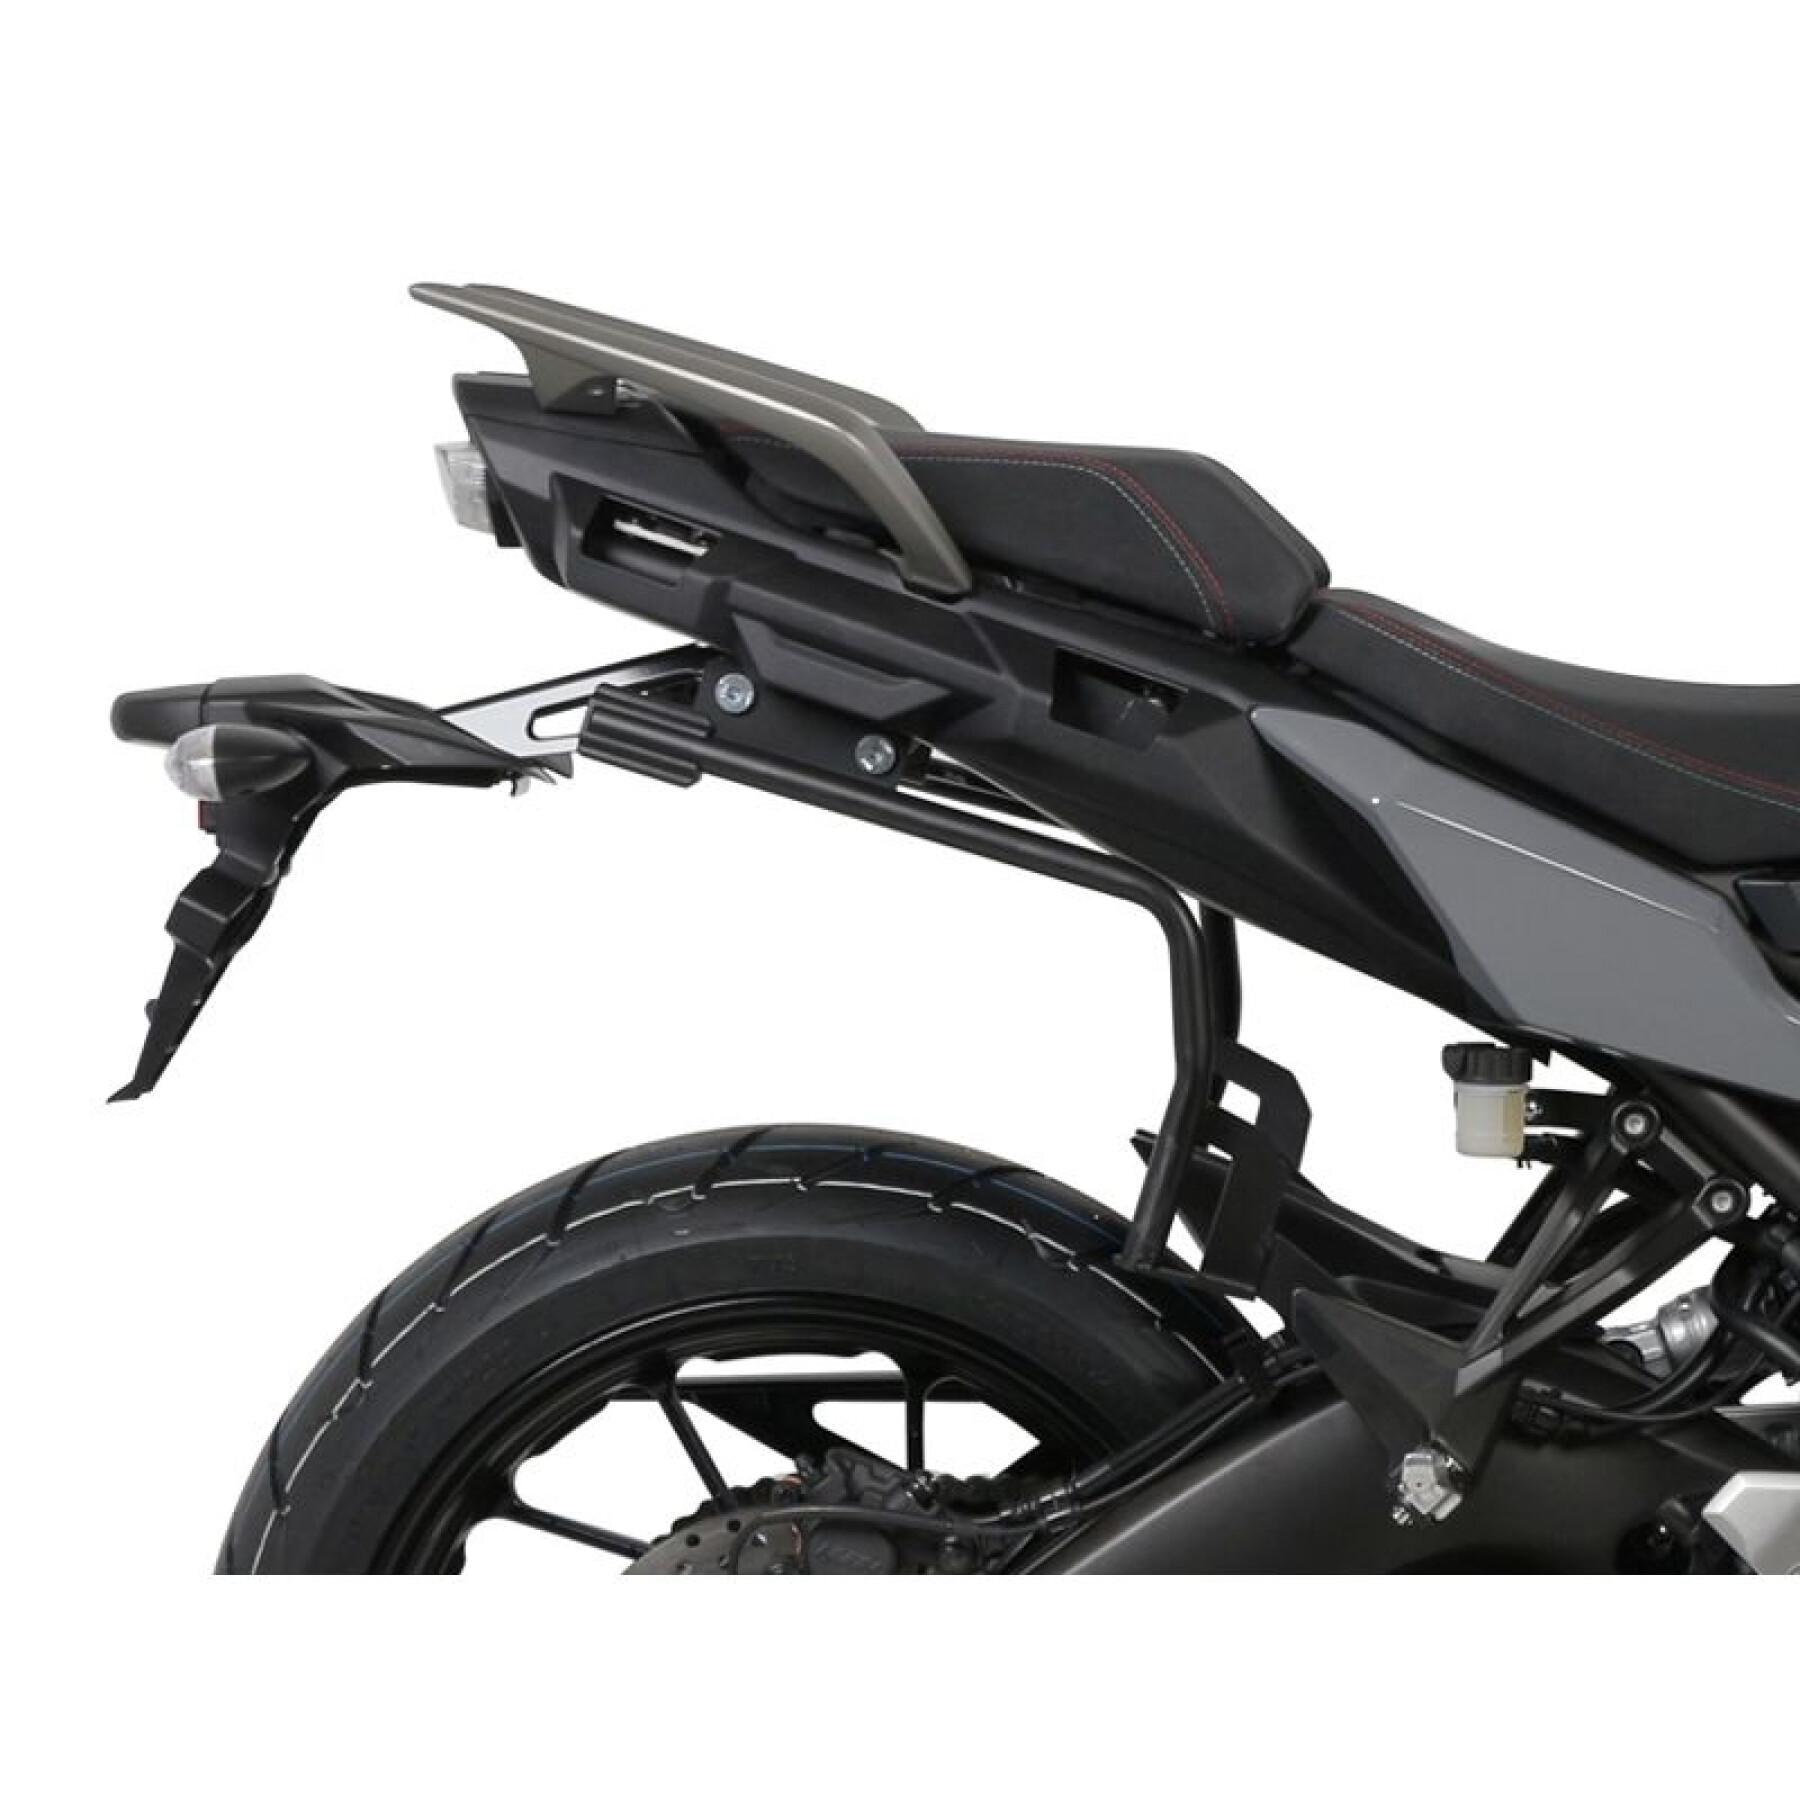 Support valises latérales moto Shad 3P System Yamaha Tracer 900 / Gt (18 À 20)